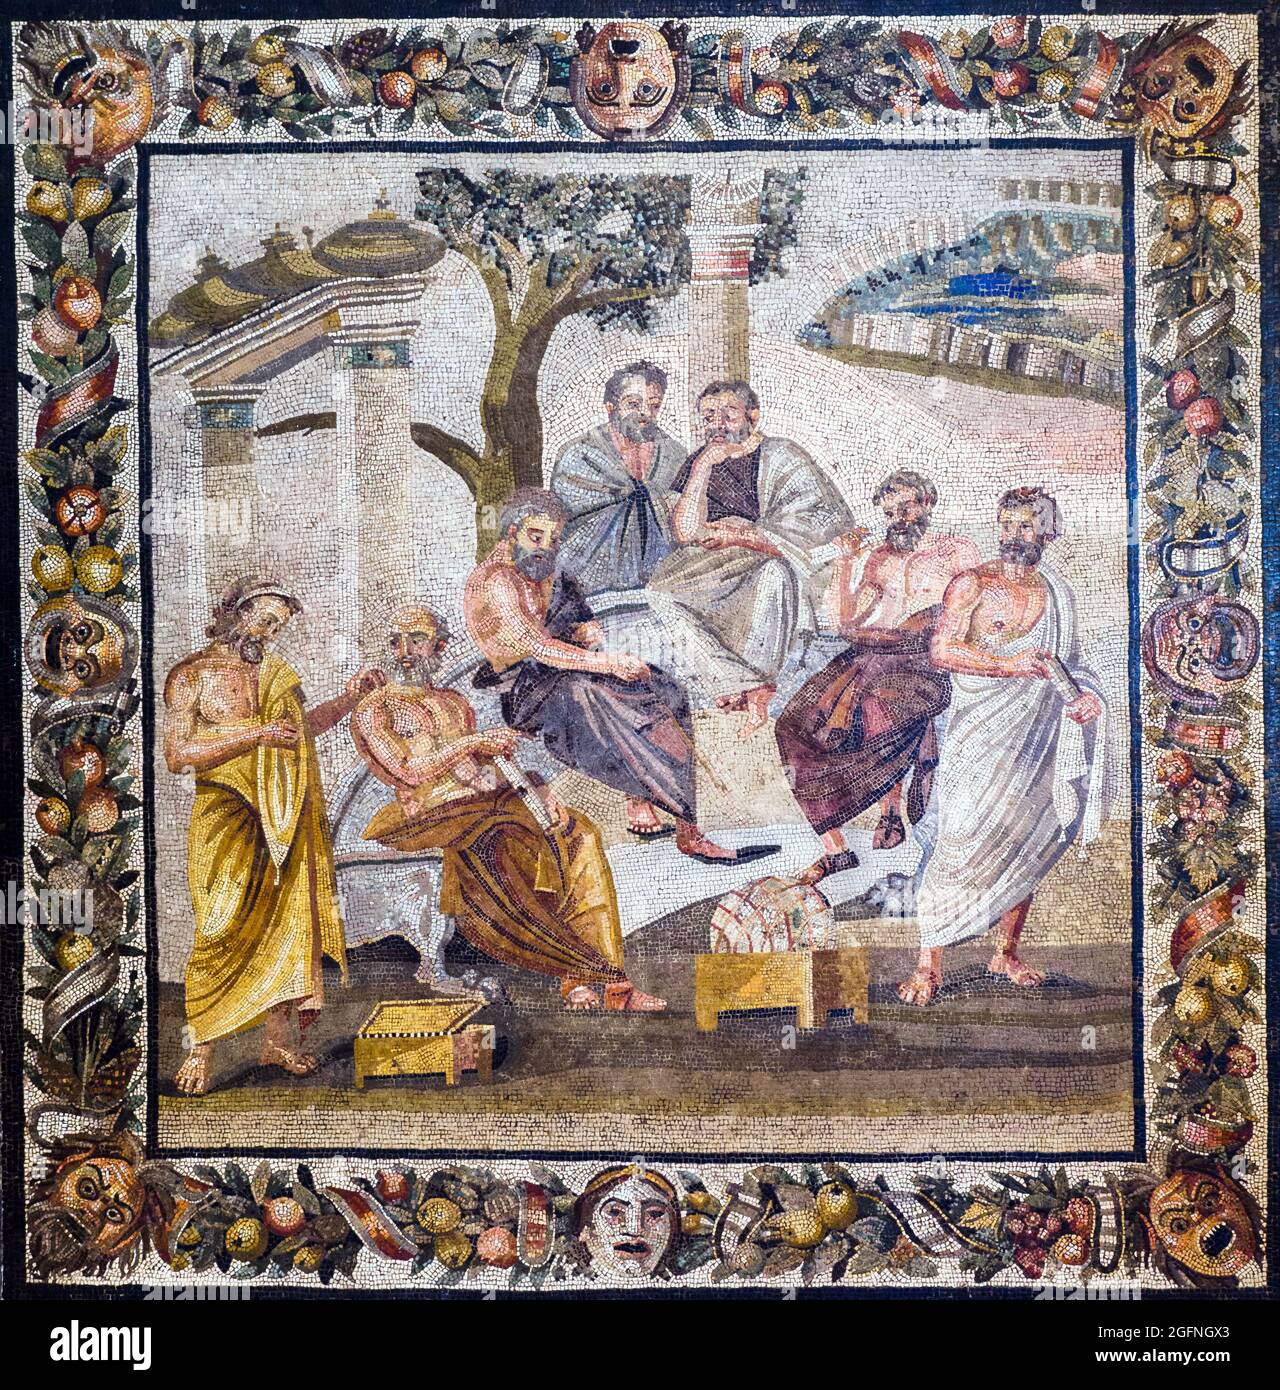 Plato's academy Mosaic emblema in opus vermiculatum made from polychrome tesserae. The mosaic depicts a group of philosophers, identifiable from their clothes and the symbols of their science, who are deep in discussion beneath a tree, between a votive column and a sacred gate with vases. In the distance there is a walled city. The scene is surrounded by a festoon of leaves and fruits, adorned with ribbons and comic masks. Pompeii, Villa of T. Siminius Stephanus Early 1st century BC Stock Photo